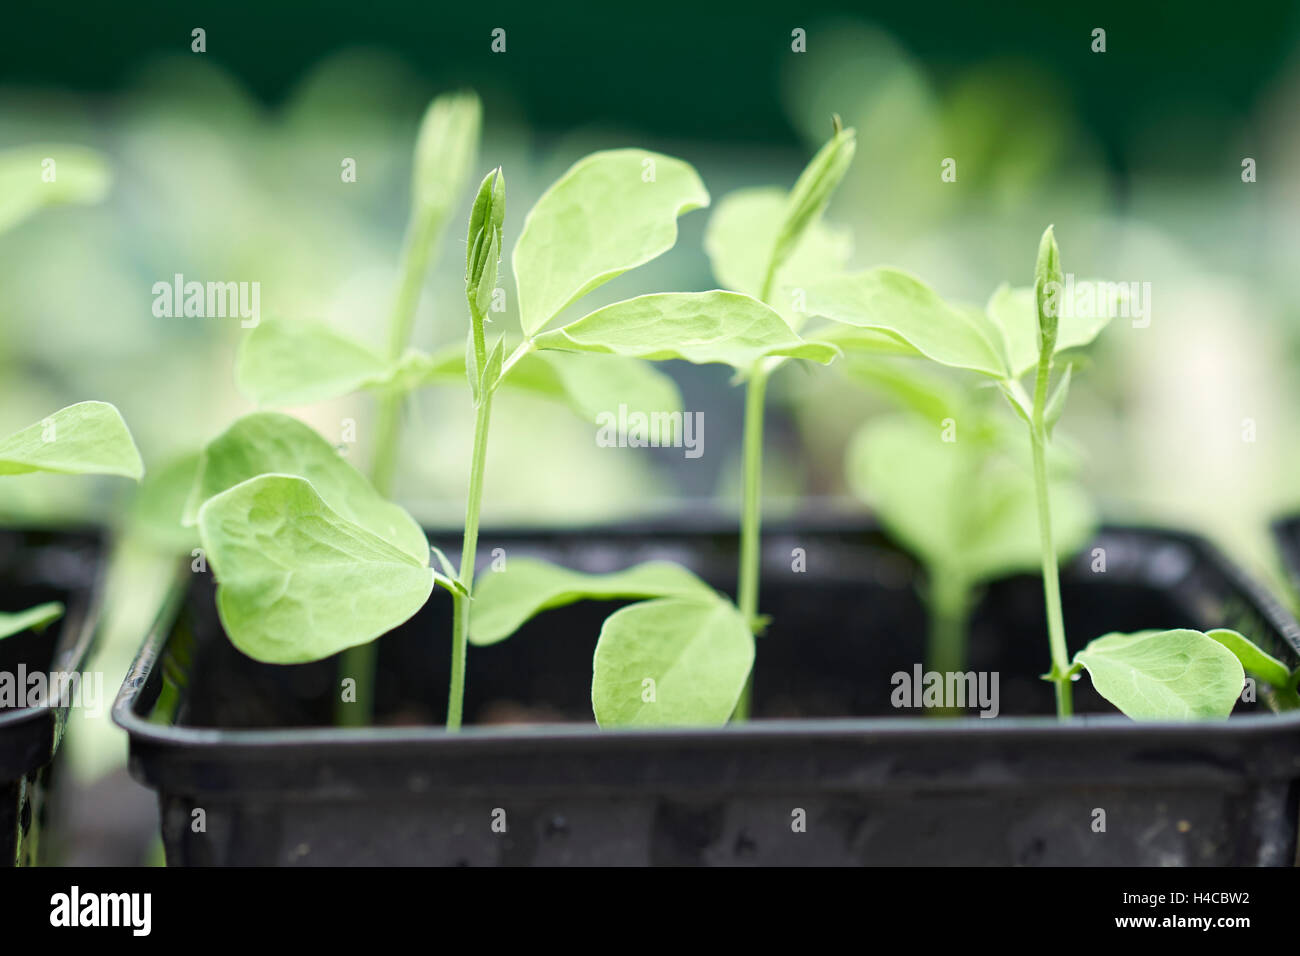 Sweet pea 'Old Spice' seedlings growing in plastic plant pots in a greenhouse, UK. Stock Photo